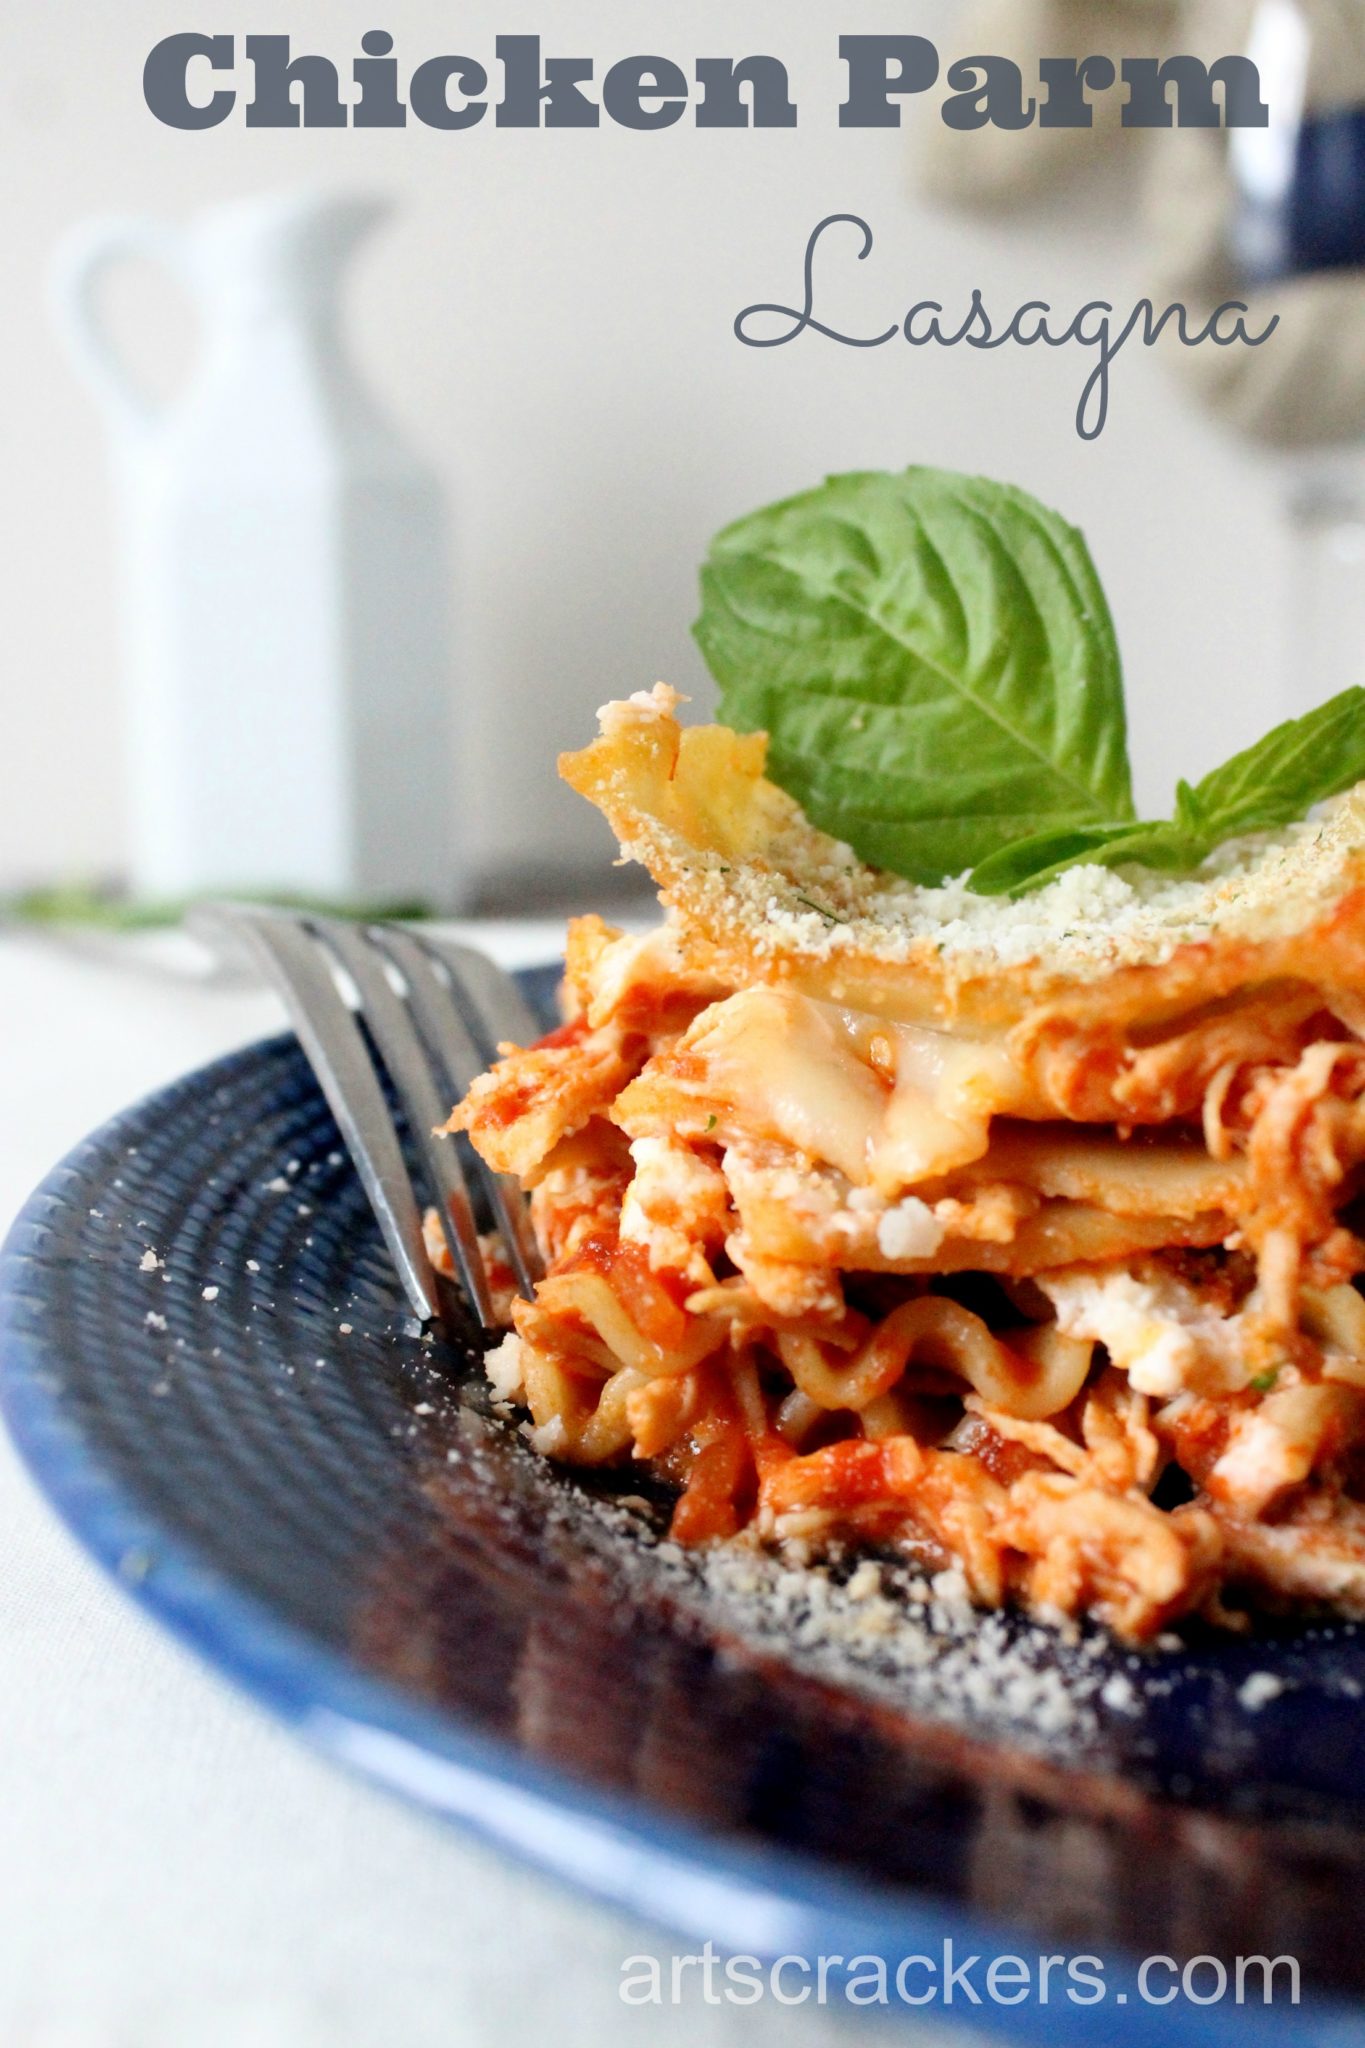 Chicken Parm Lasagna with Ragu. Click the picture to get the recipe.